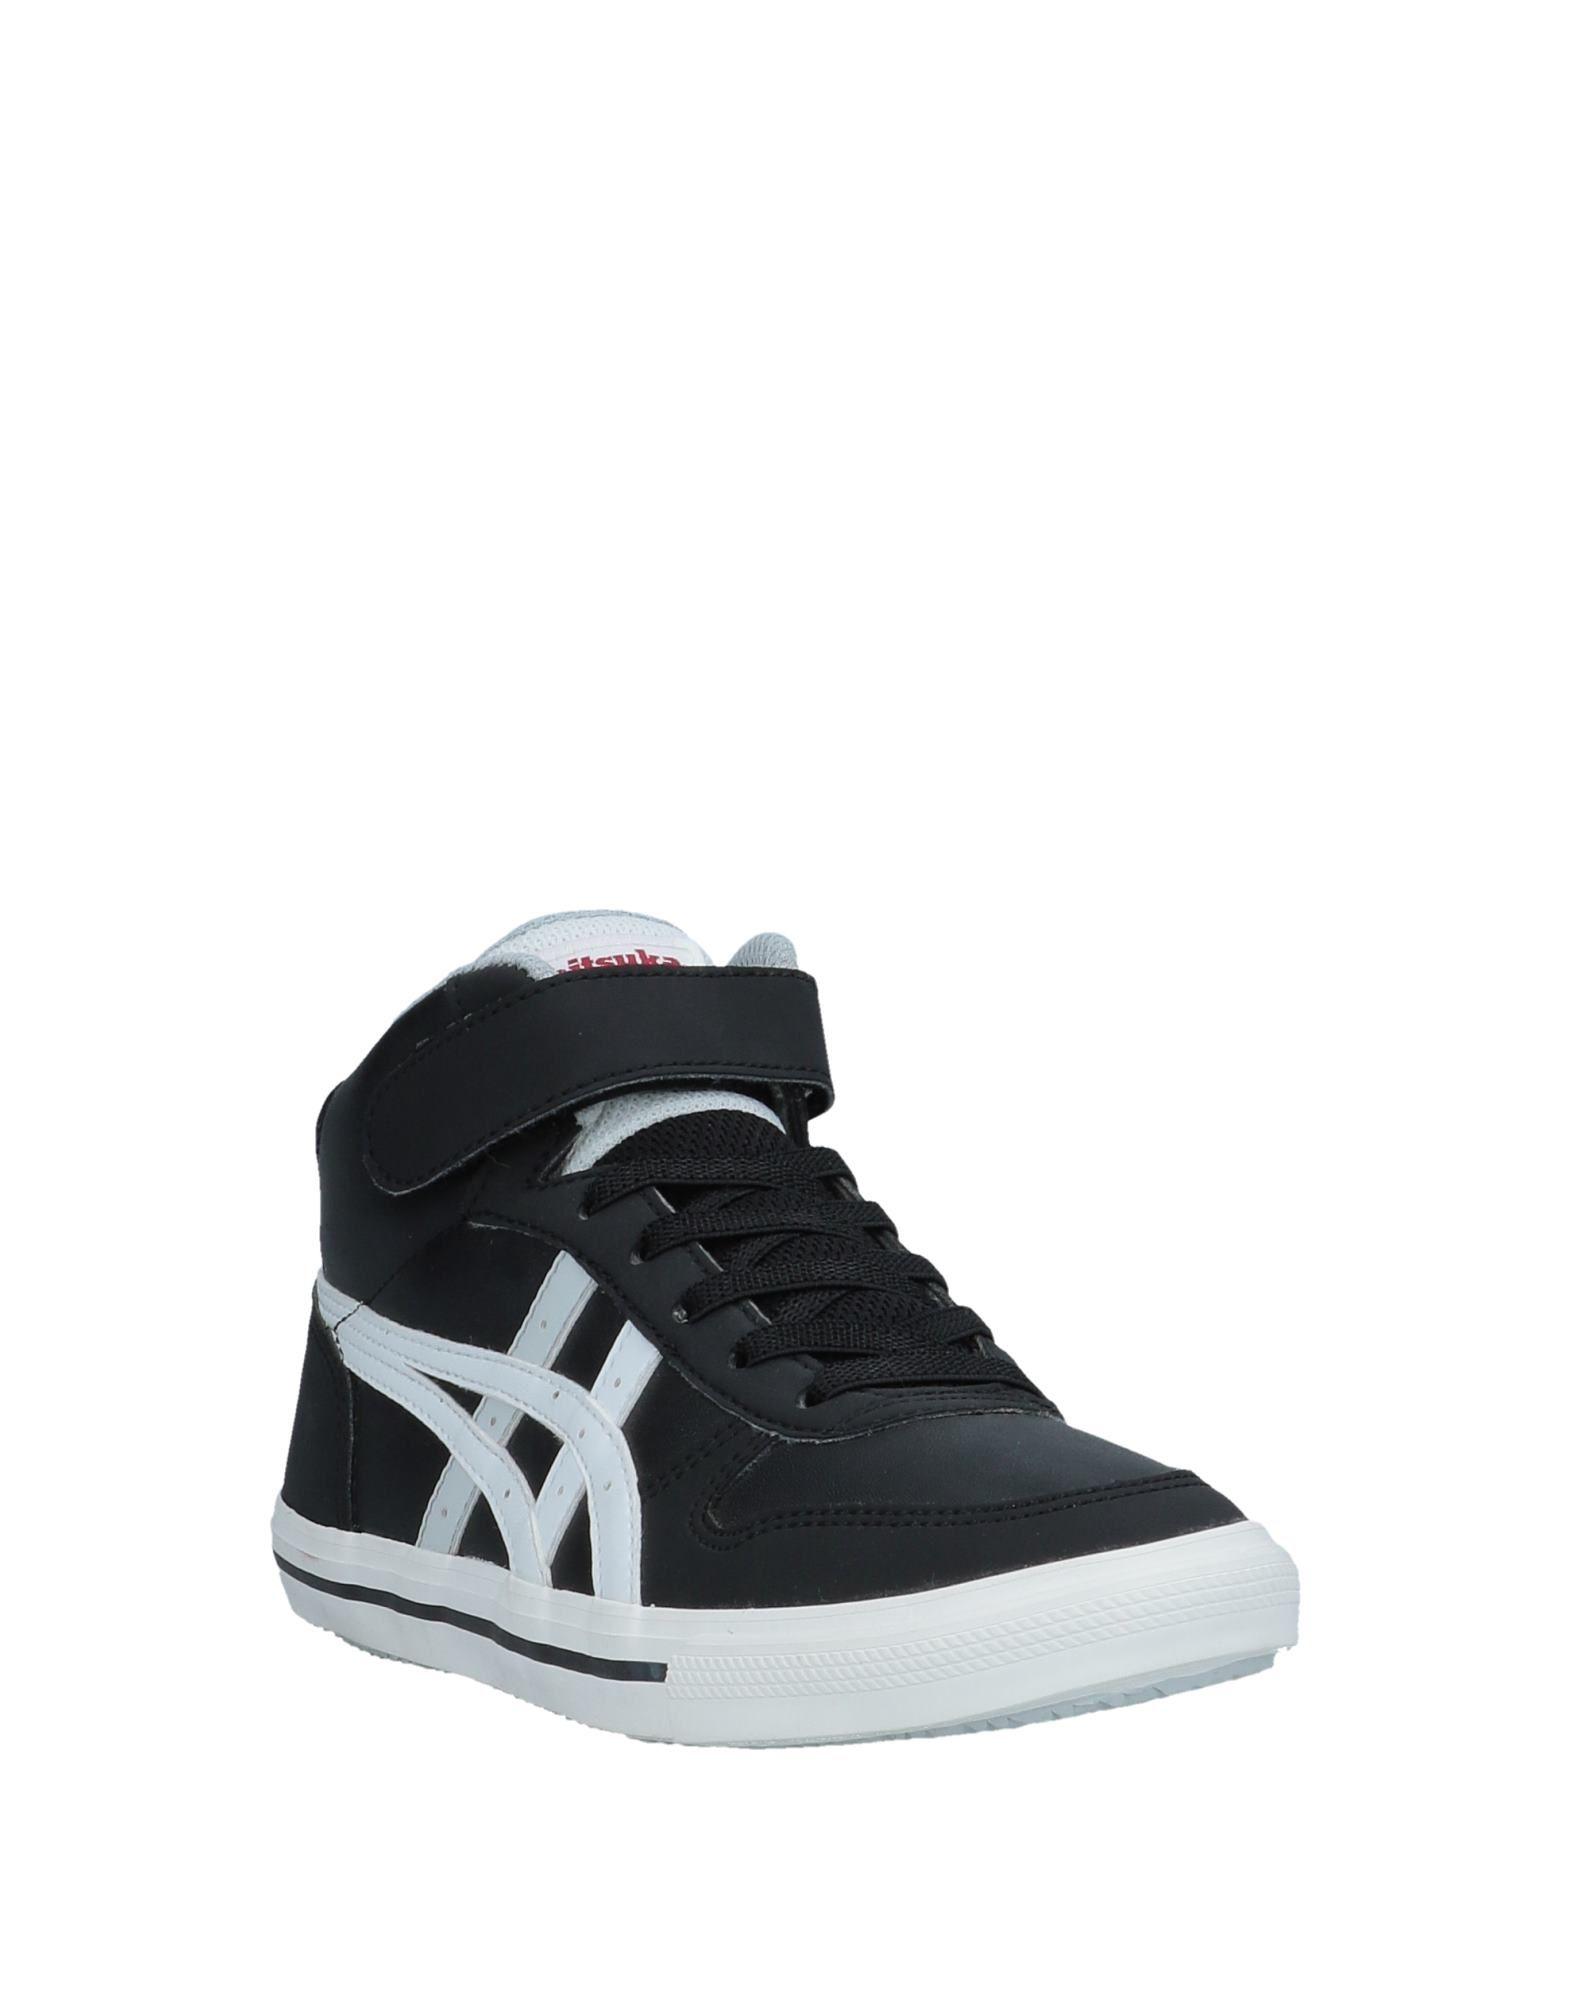 Lyst - Onitsuka Tiger High-tops & Sneakers in Black for Men